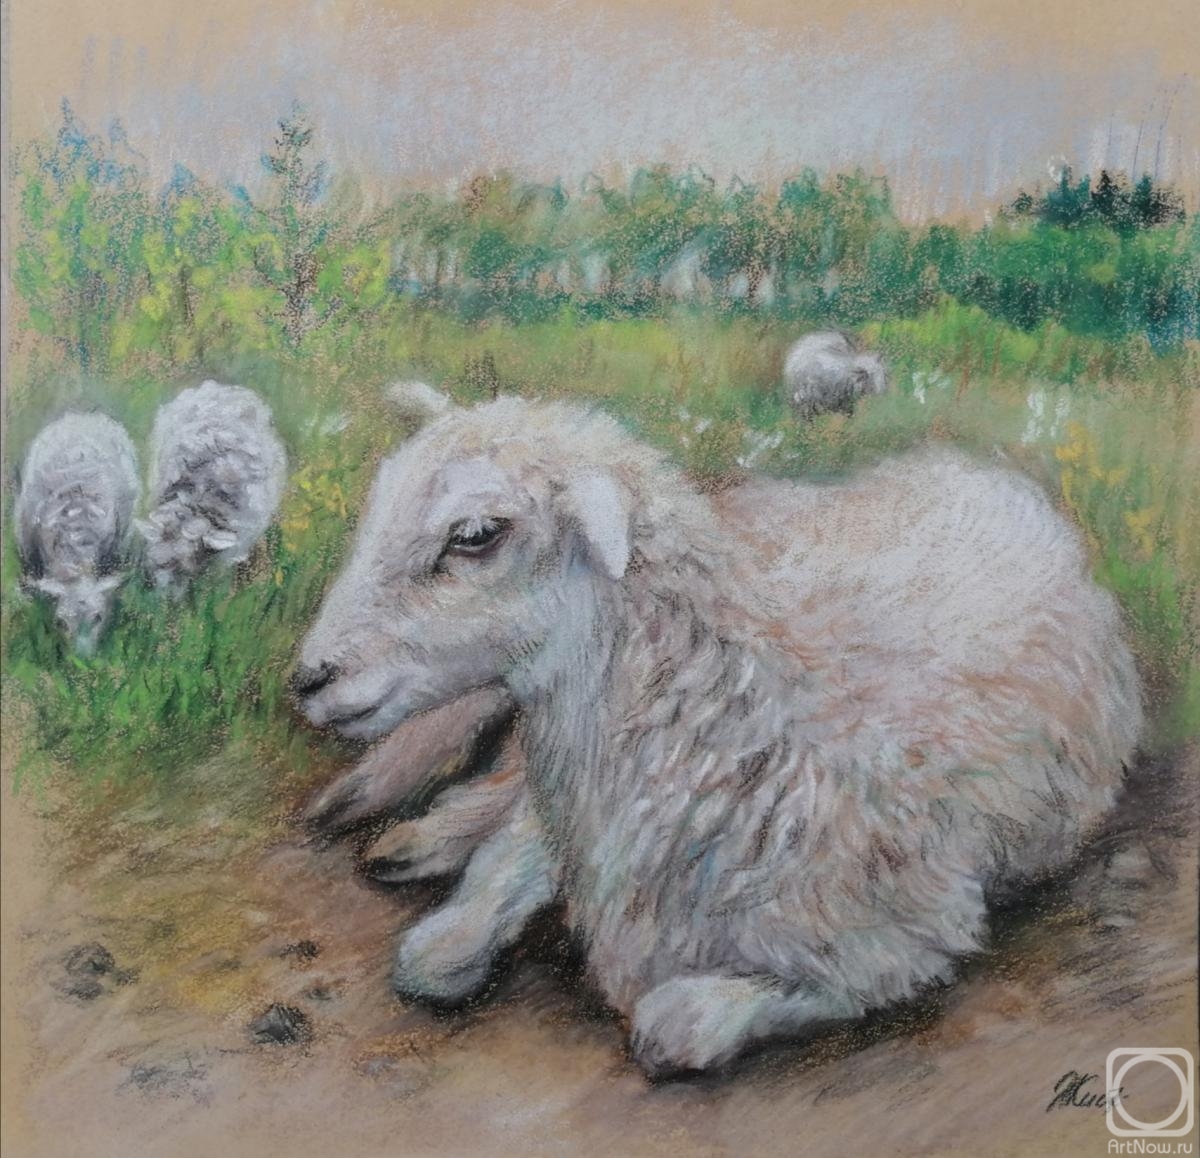 Kistanova Nadezhda. The Lamb thought about her own, about the eternal